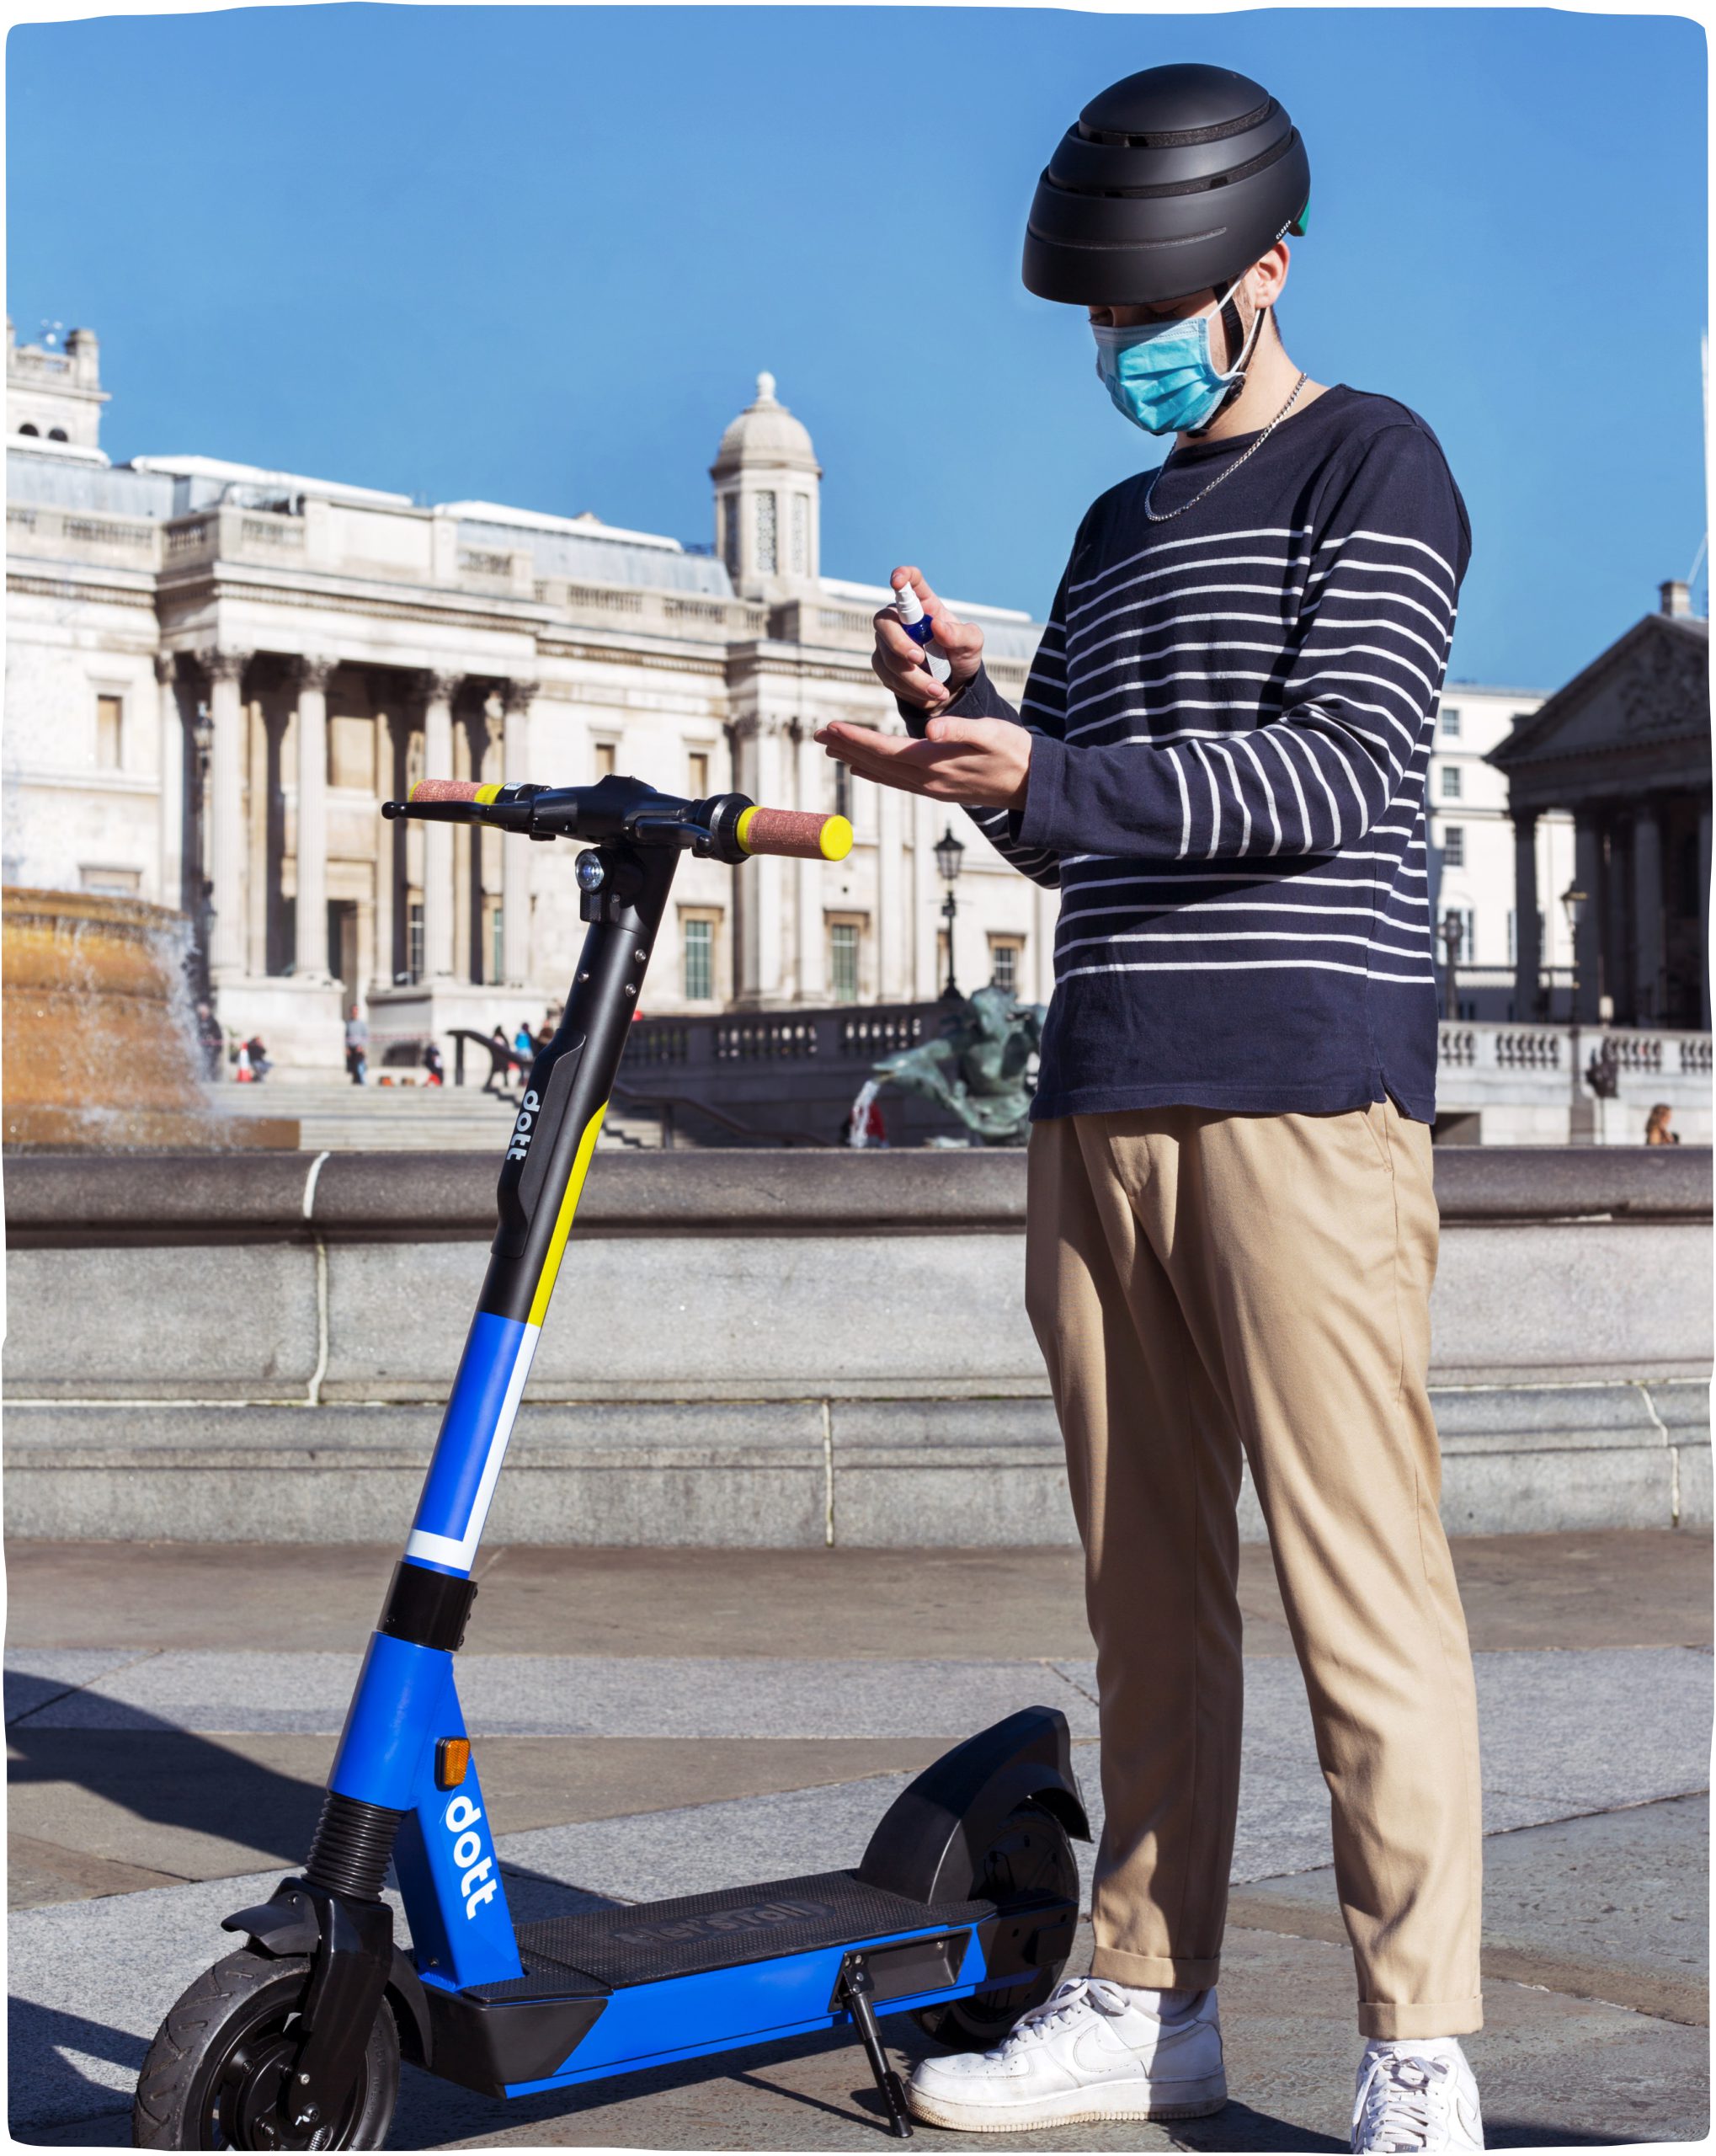 A young man stands next to a blue Dott scooter wearing a helmet and face mask. He is spraying his hands with disinfectant.